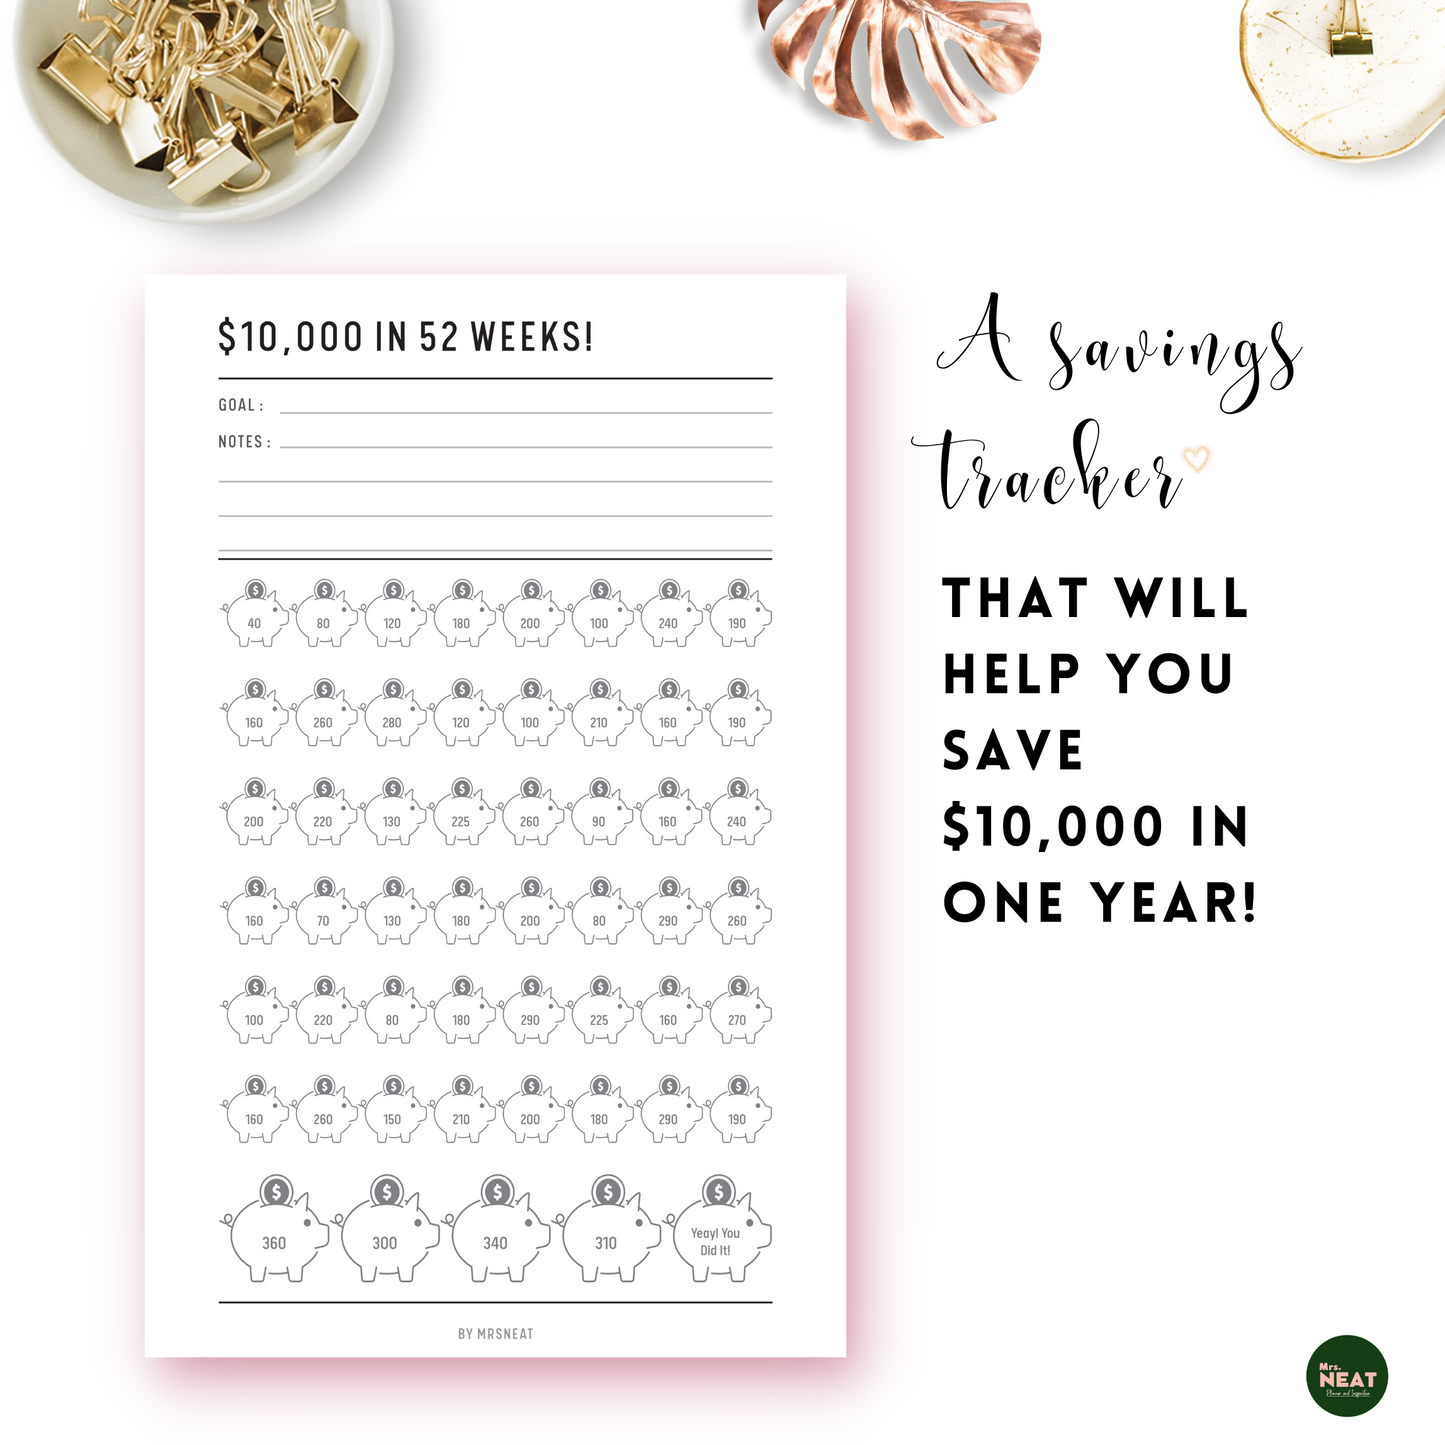 A saving Tracker that will help you save $10000 in one year